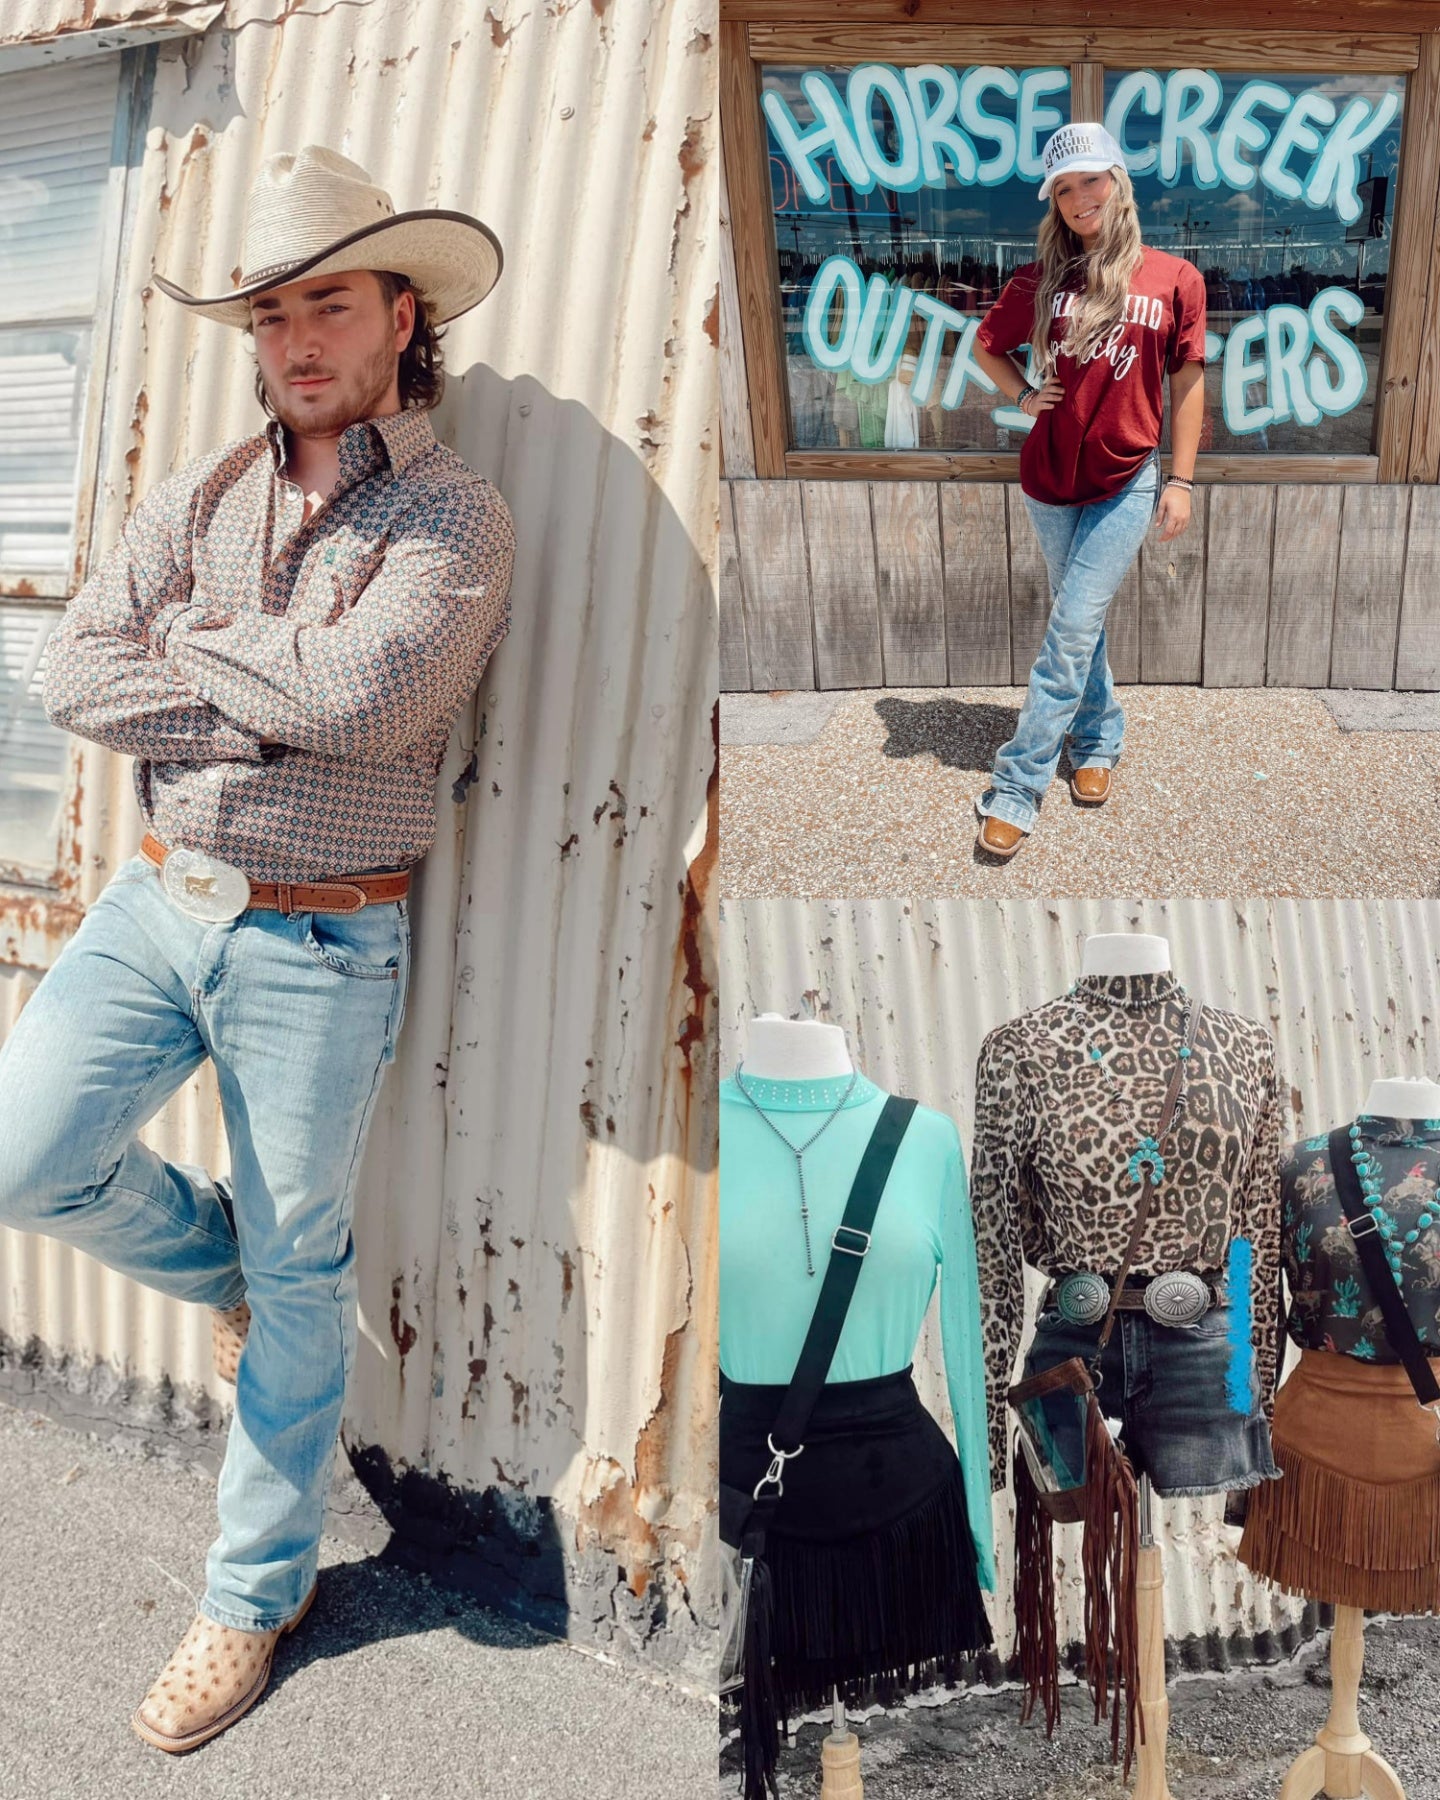 Horse Creek Outfitters - Men's and Women's styling options